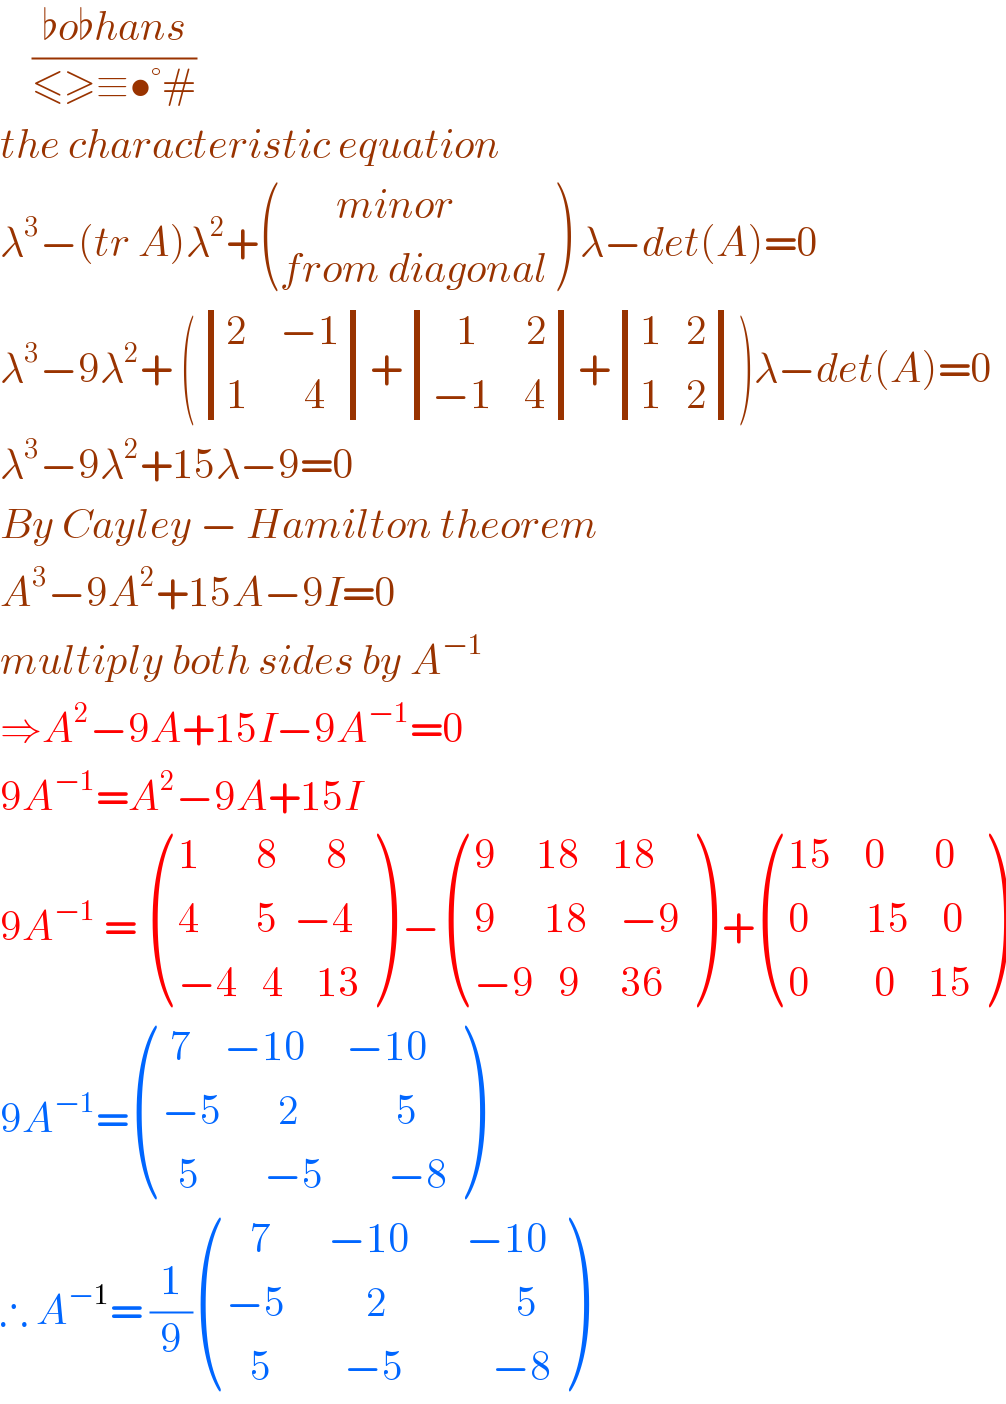     ((♭o♭hans)/(≤≥≡•°#))  the characteristic equation   λ^3 −(tr A)λ^2 + (((       minor )),((from diagonal)) ) λ−det(A)=0  λ^3 −9λ^2 + ( determinant (((2    −1)),((1       4)))+ determinant (((   1      2)),((−1    4)))+ determinant (((1   2)),((1   2))))λ−det(A)=0  λ^3 −9λ^2 +15λ−9=0  By Cayley − Hamilton theorem  A^3 −9A^2 +15A−9I=0  multiply both sides by A^(−1)   ⇒A^2 −9A+15I−9A^(−1) =0  9A^(−1) =A^2 −9A+15I  9A^(−1)  =  (((1       8      8)),((4       5  −4)),((−4   4    13)) ) − (((9     18    18)),((9      18    −9)),((−9   9     36)) ) + (((15    0      0)),((0       15    0)),((0        0    15)) )  9A^(−1) = ((( 7    −10     −10)),((−5       2            5)),((  5        −5        −8)) )  ∴ A^(−1) = (1/9) (((   7       −10       −10)),((−5          2                5)),((   5         −5           −8)) )  